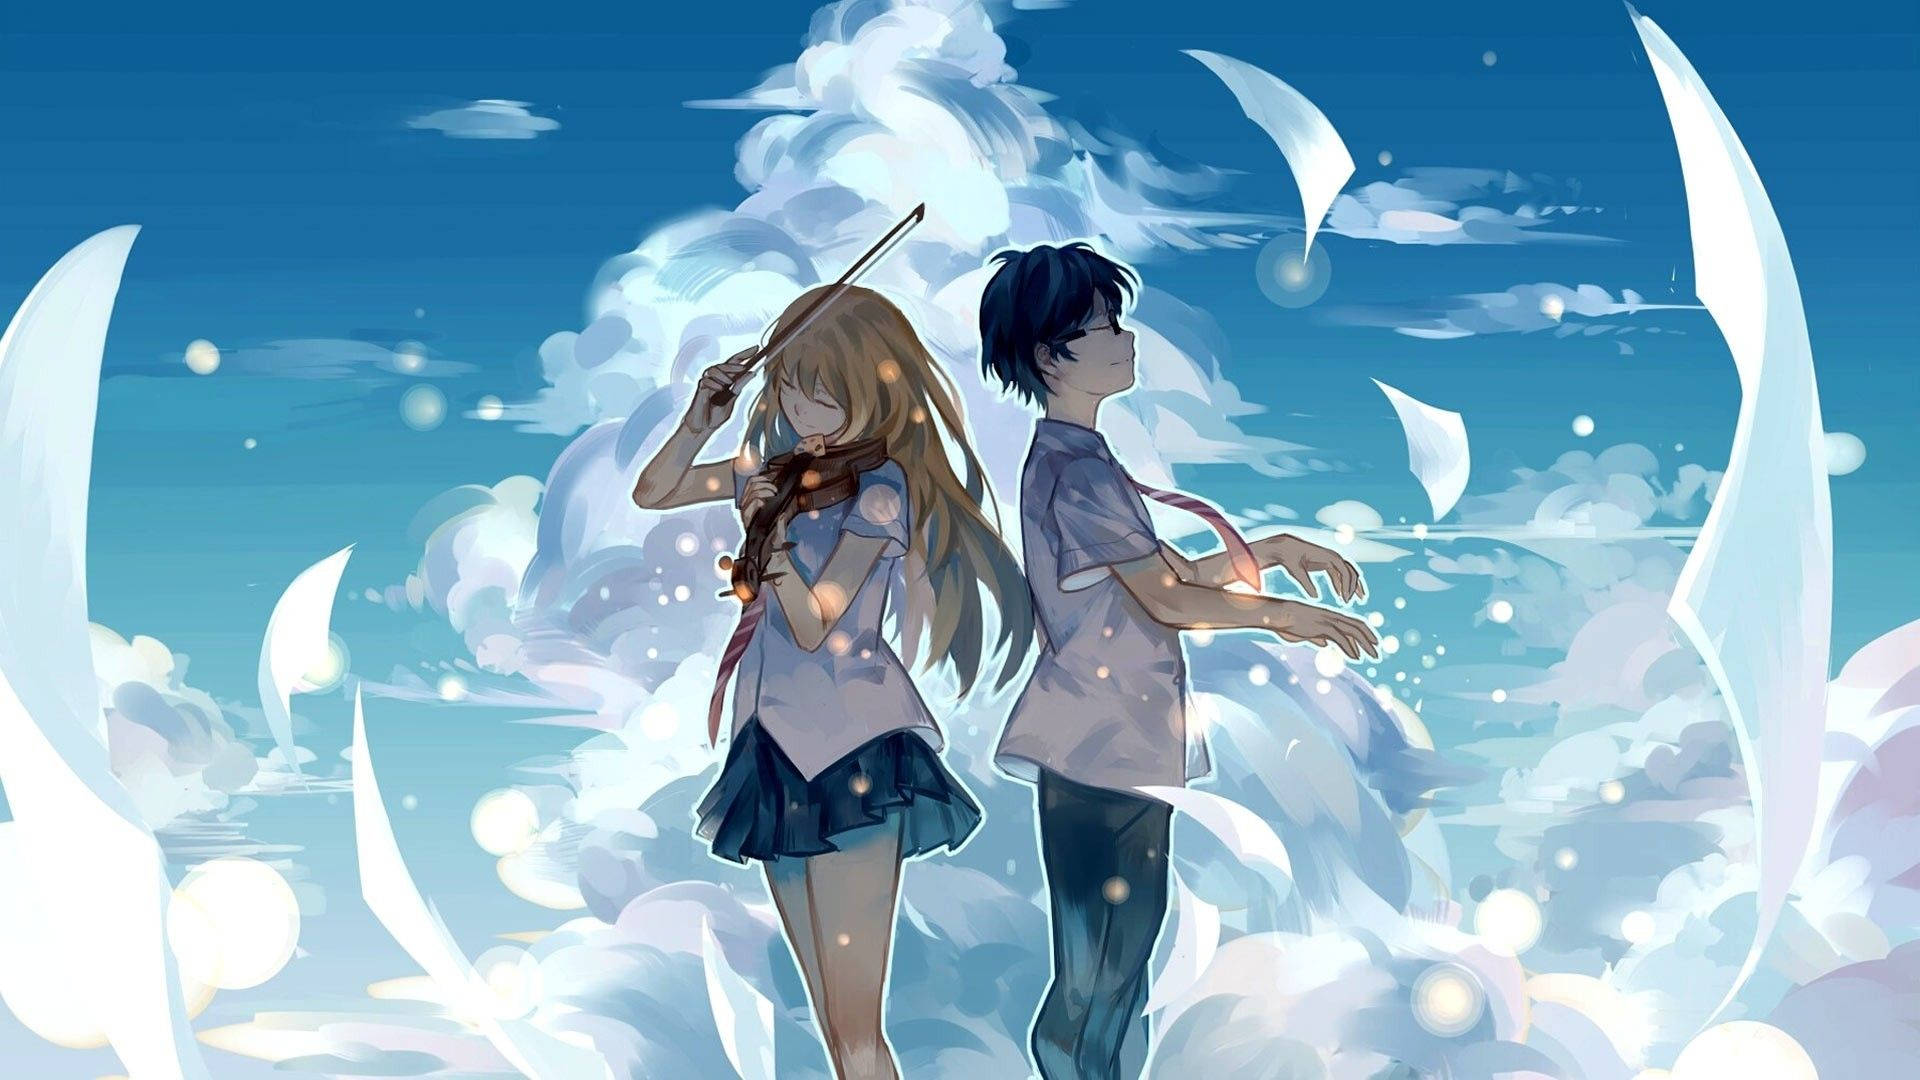 Your Lie In April Anime Aesthetic Background